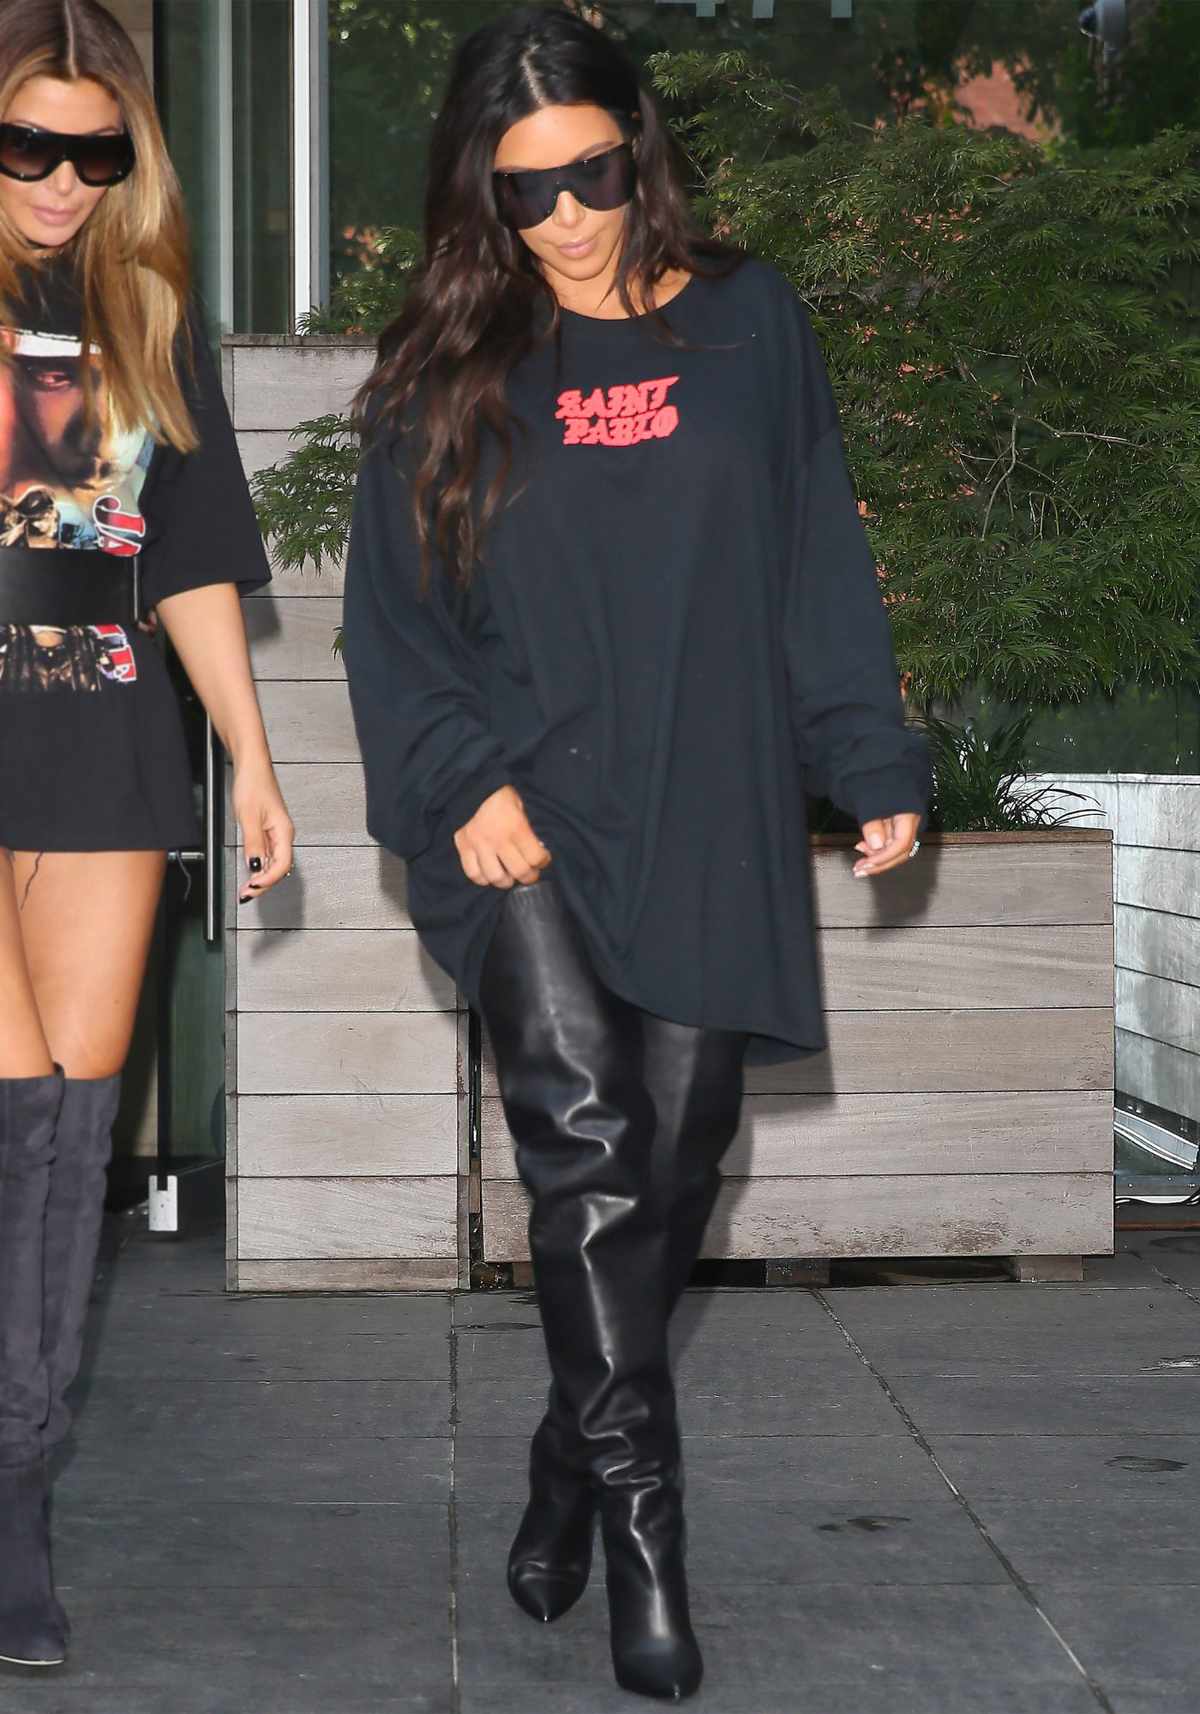 Pablo T-Shirt and Thigh-High Boots 